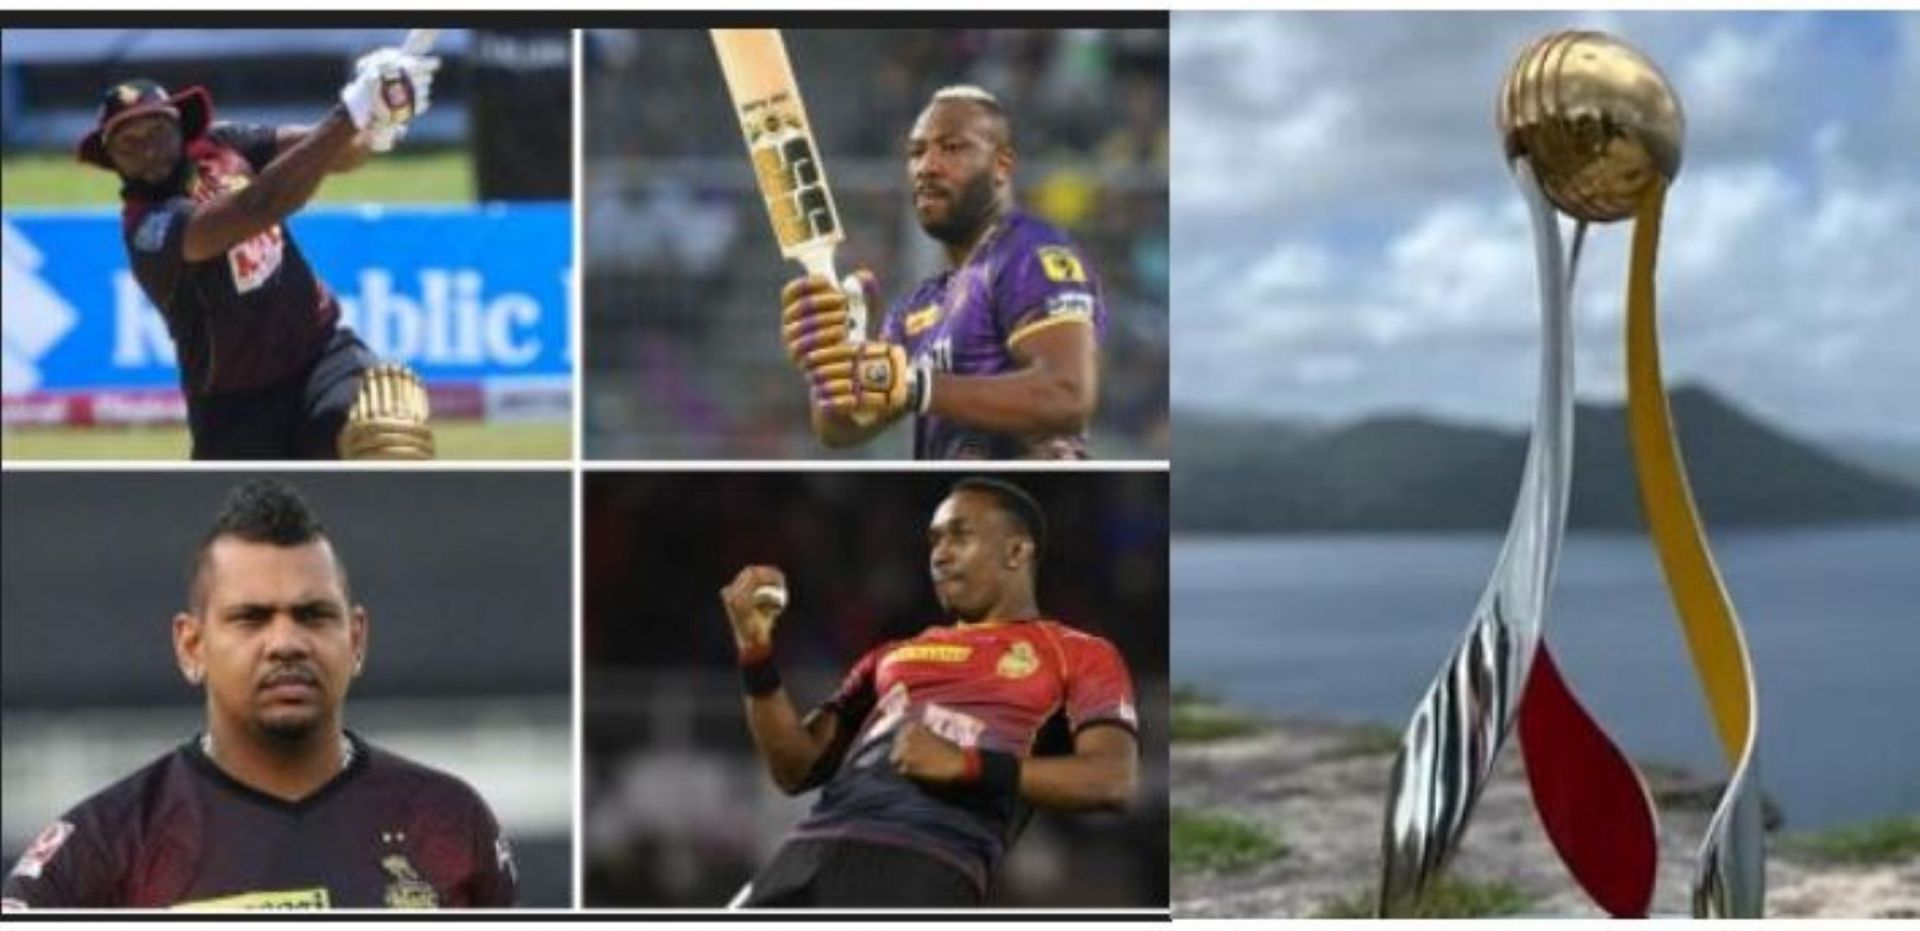 Trinbago Knight Riders will look to bounce back from a dismal 2022 season